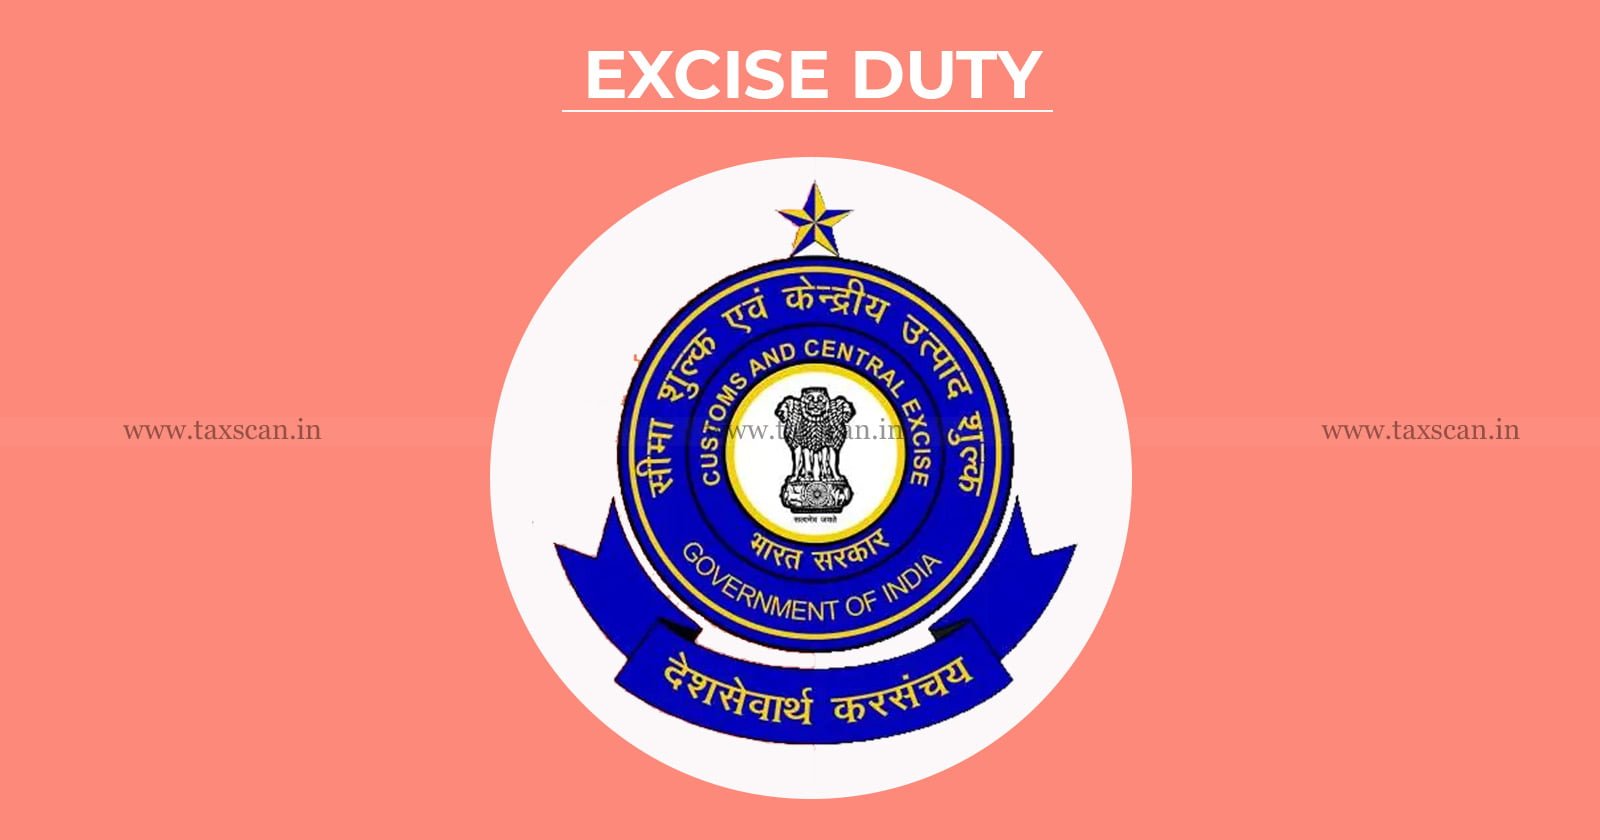 Demand - Excise - Duty - Valid - the Transaction - Done without – Payment – Duty - CESTAT - reduces - Penalty